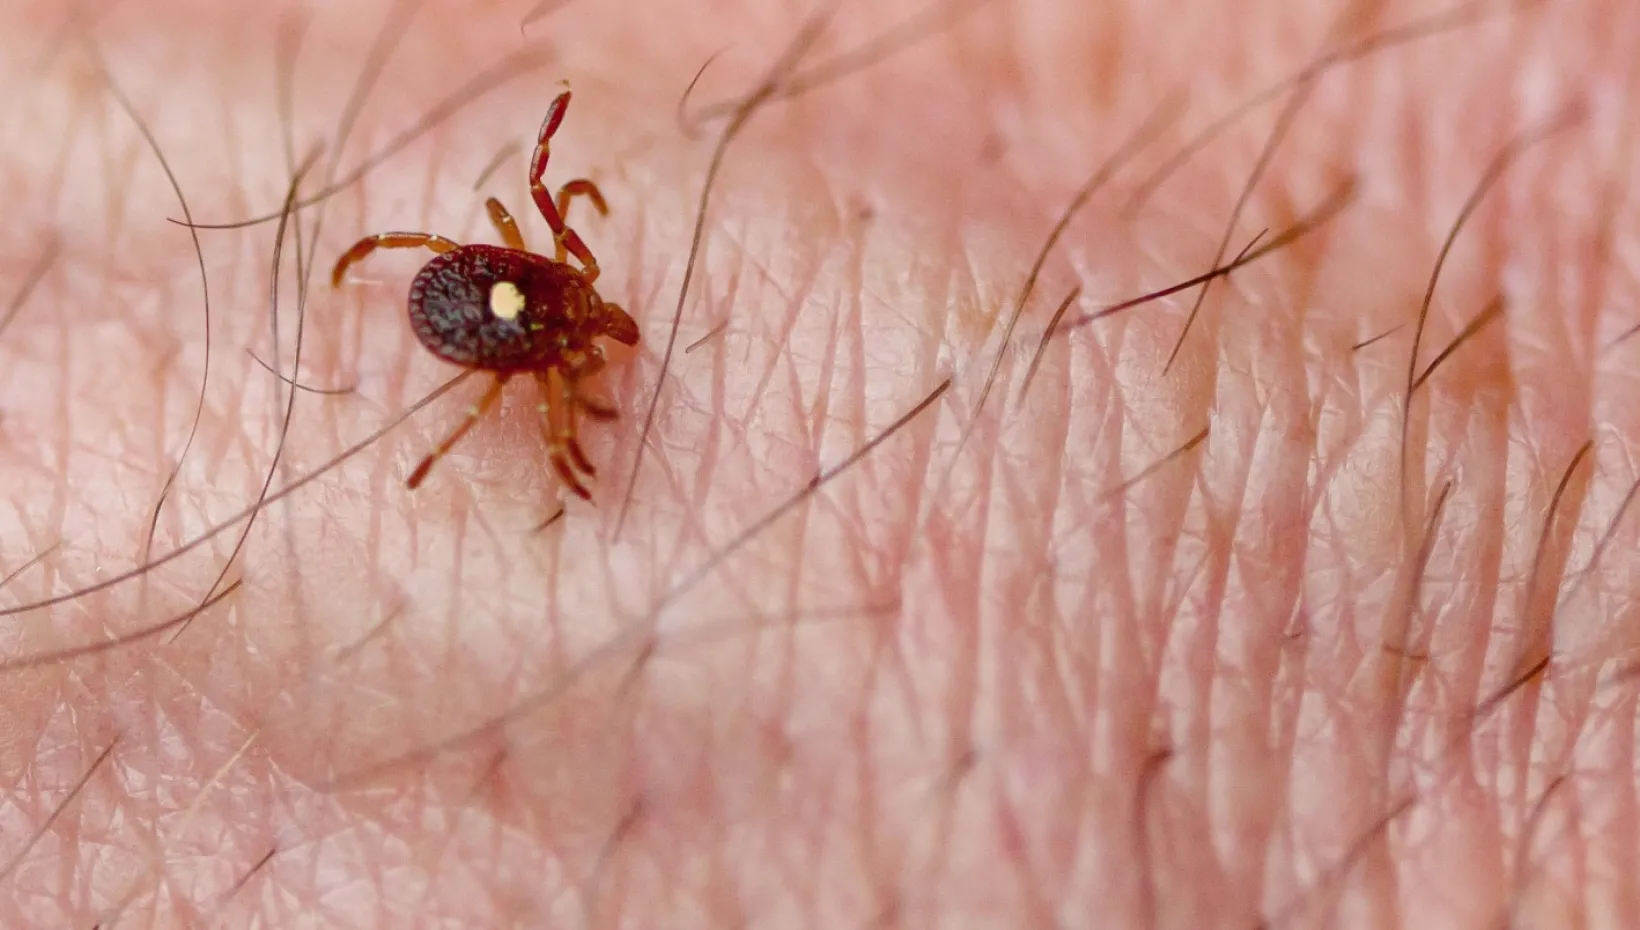 Human monocytic ehrlichiosis is caused by the bite of infected ticks, including the lone star tick (Amblyomma americanum).